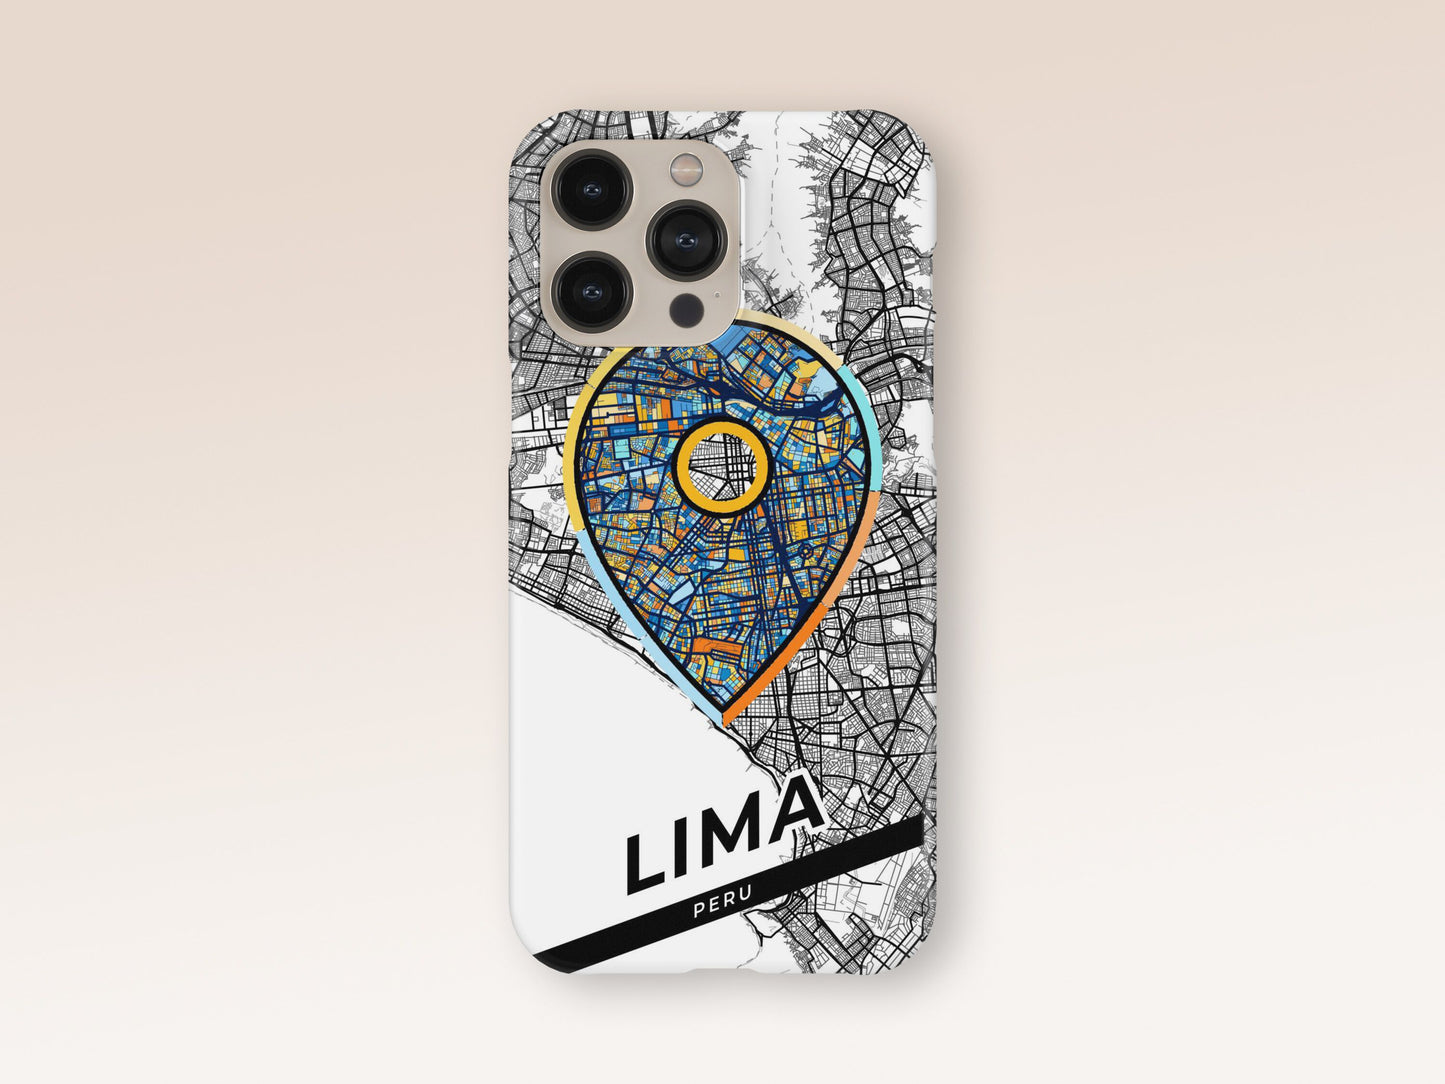 Lima Peru slim phone case with colorful icon. Birthday, wedding or housewarming gift. Couple match cases. 1